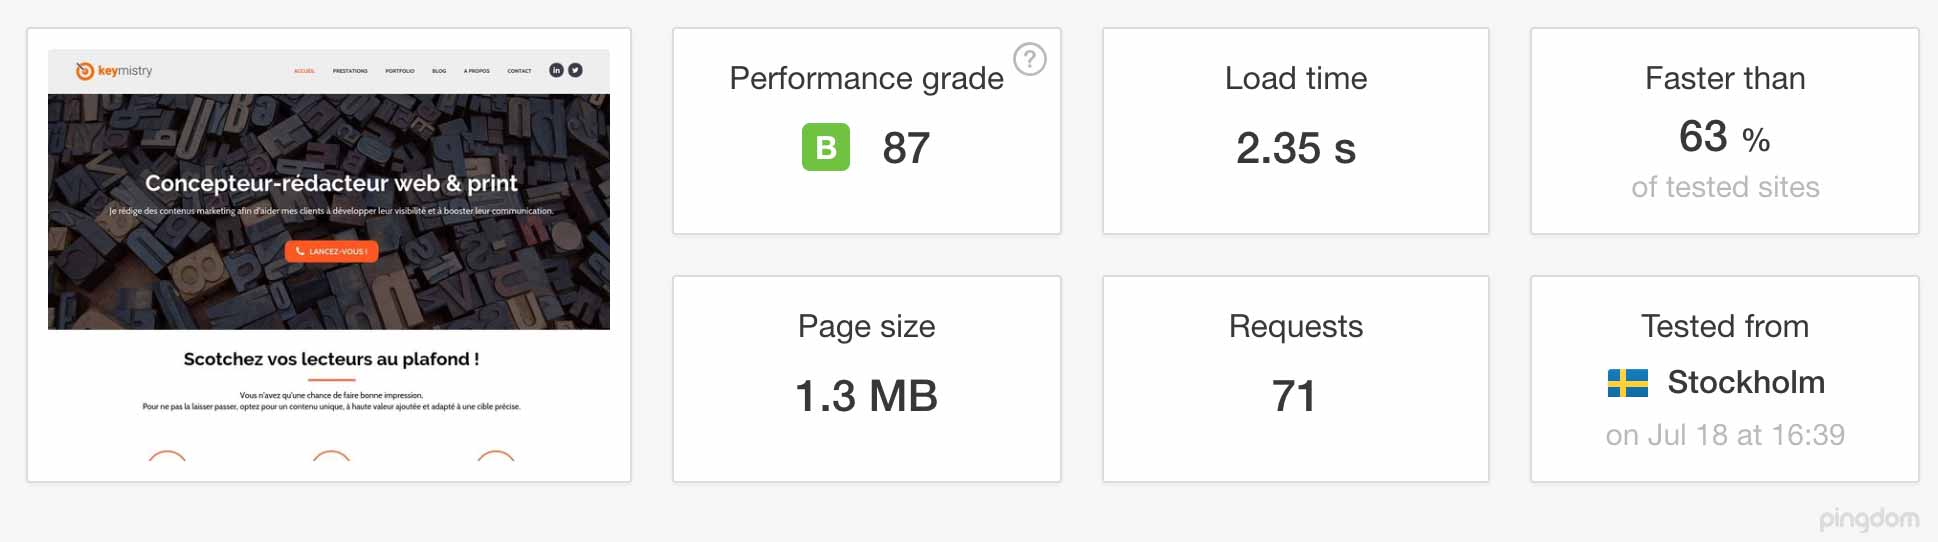 Pingdom performance test without WP Rocket enabled.